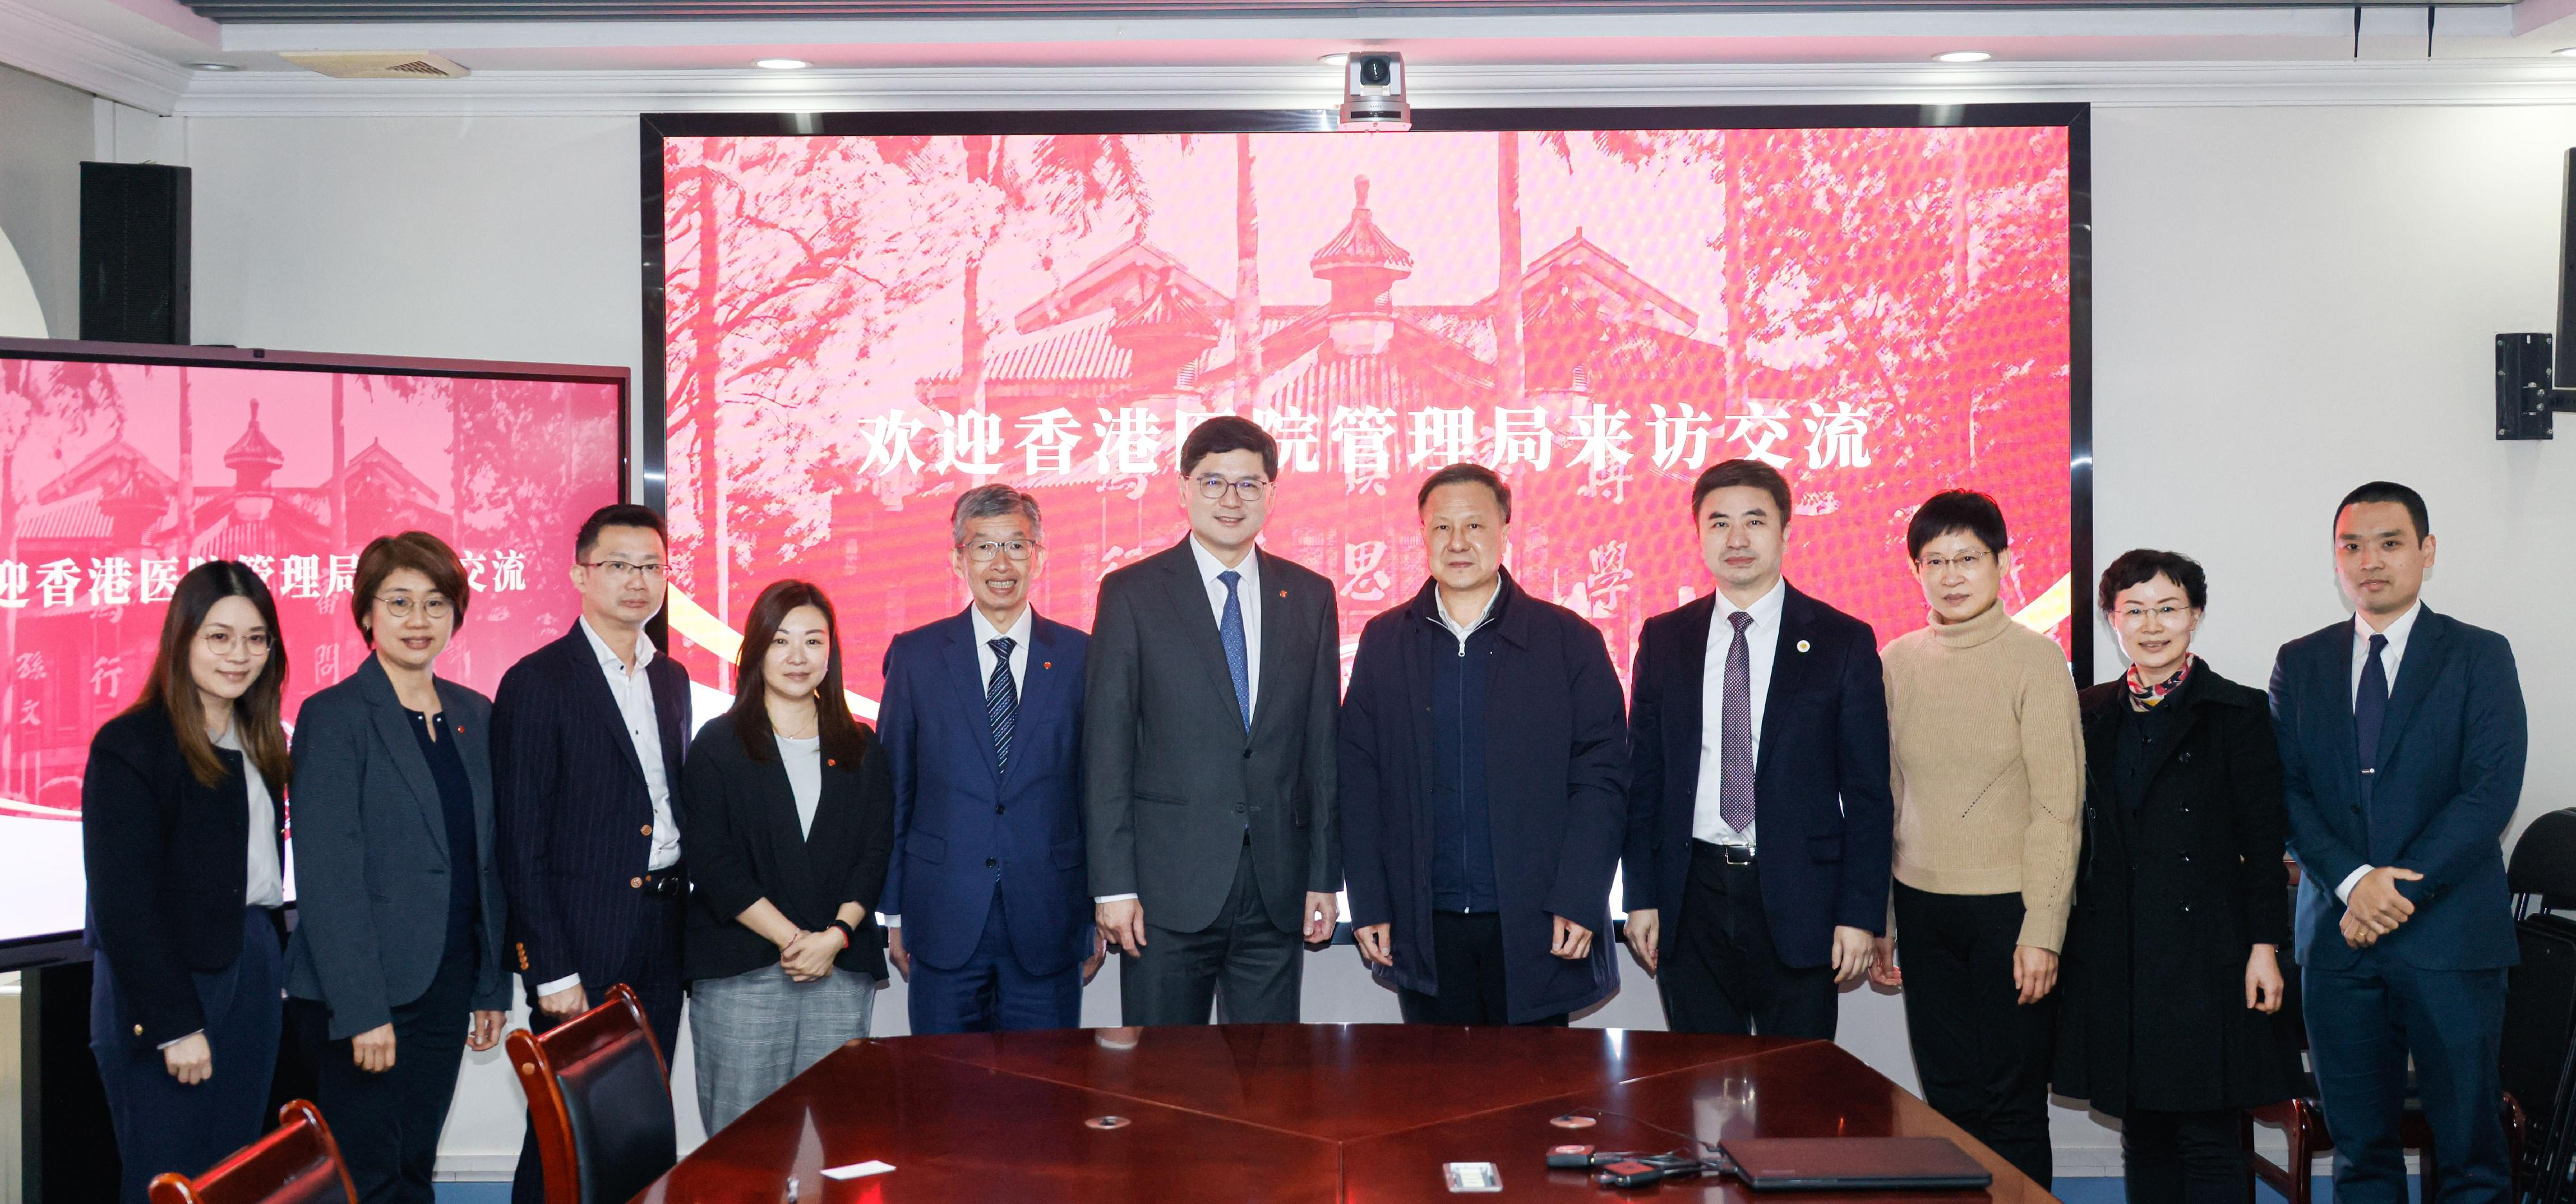 The Hospital Authority (HA) delegation led by the Chief Executive of the HA, Dr Tony Ko (sixth left), visited the Sun Yat-sen University and its First Affiliated Hospital in Guangzhou today (February 23) to promote healthcare talents exchange in the Greater Bay Area (GBA), and introduced to management representatives led by the Executive Vice President of Sun Yat-sen University (SYSU) and the President of The First Affiliated Hospital, SYSU,  Professor Xiao Haipeng, (fifth right) the implementation of the Global Healthcare Talent Scheme and related exchange programmes in the GBA.  